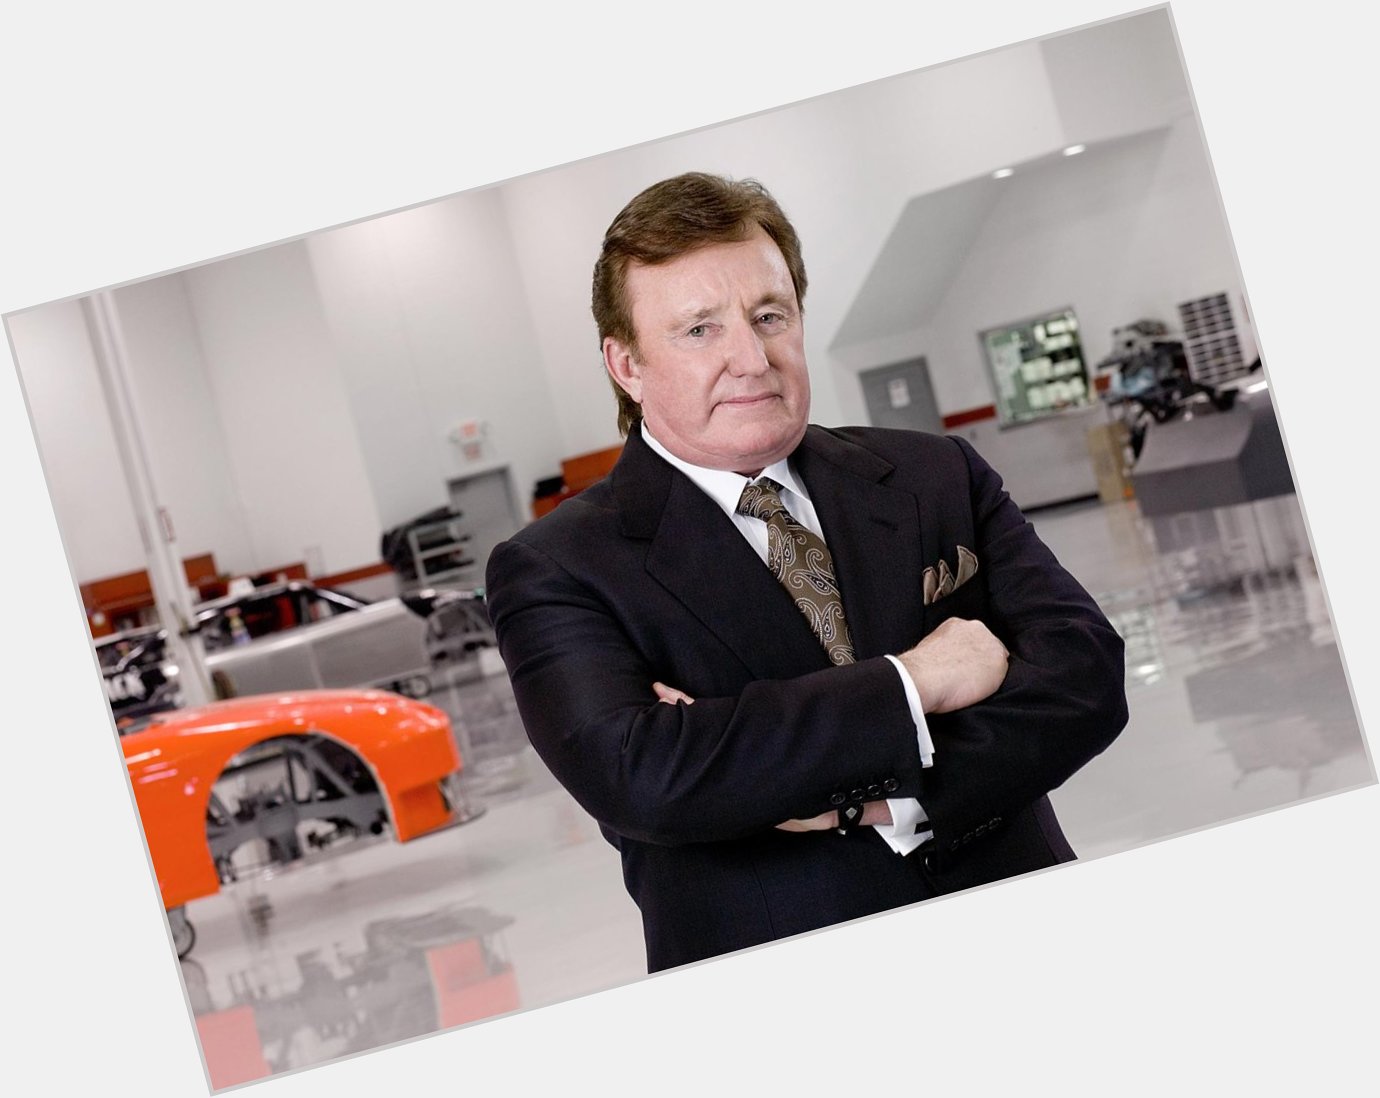 Happy 70th birthday to owner Richard Childress. Nothing like celebrating with two cars in 